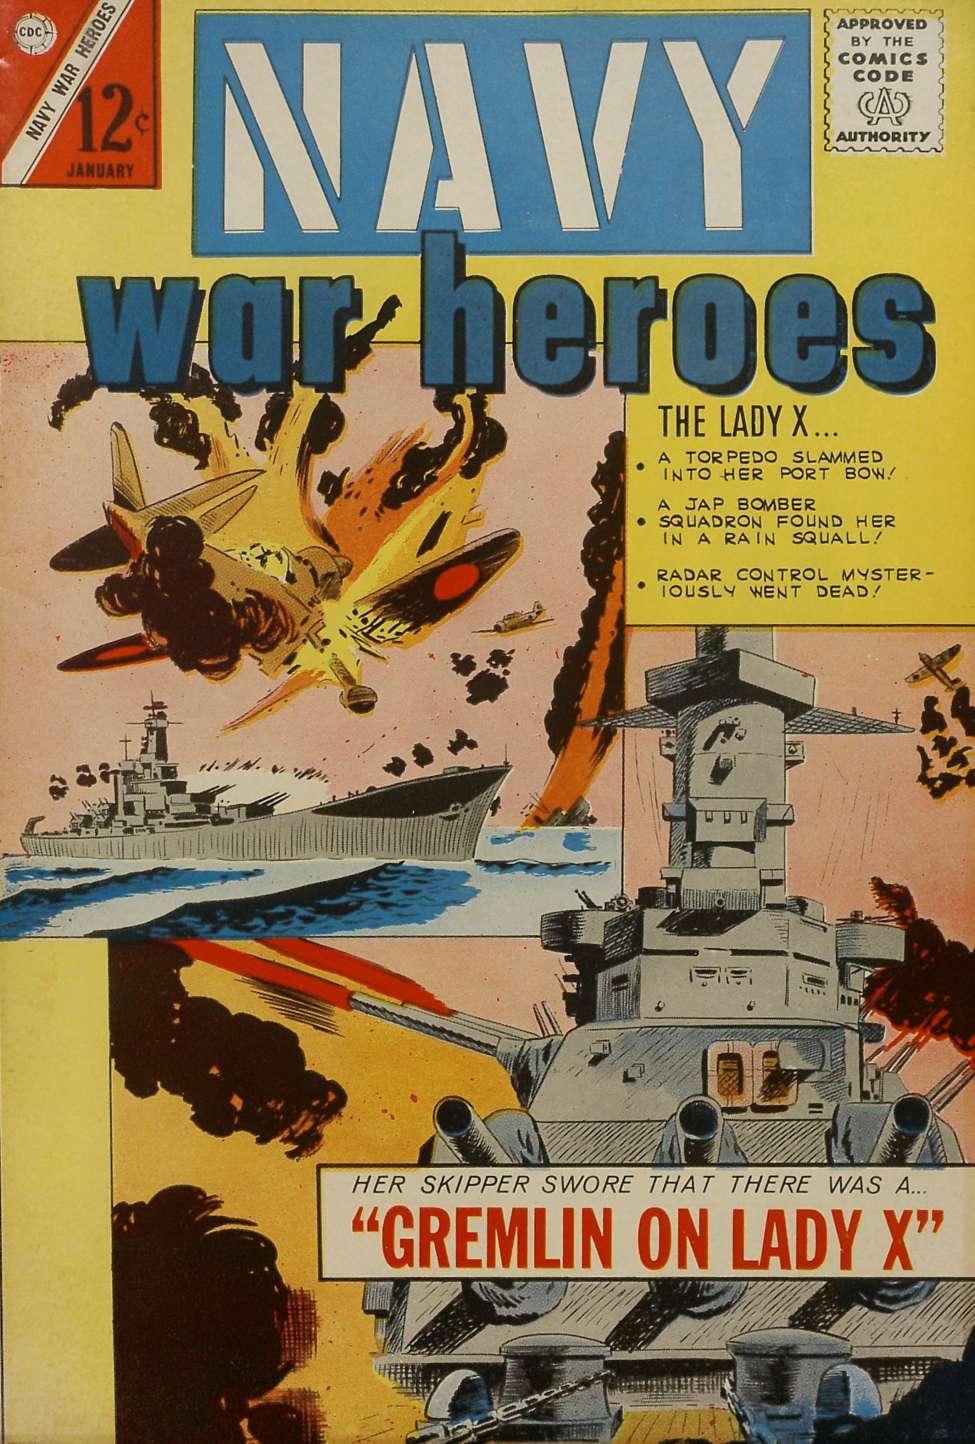 Book Cover For Navy War Heroes 1 (alt) - Version 2